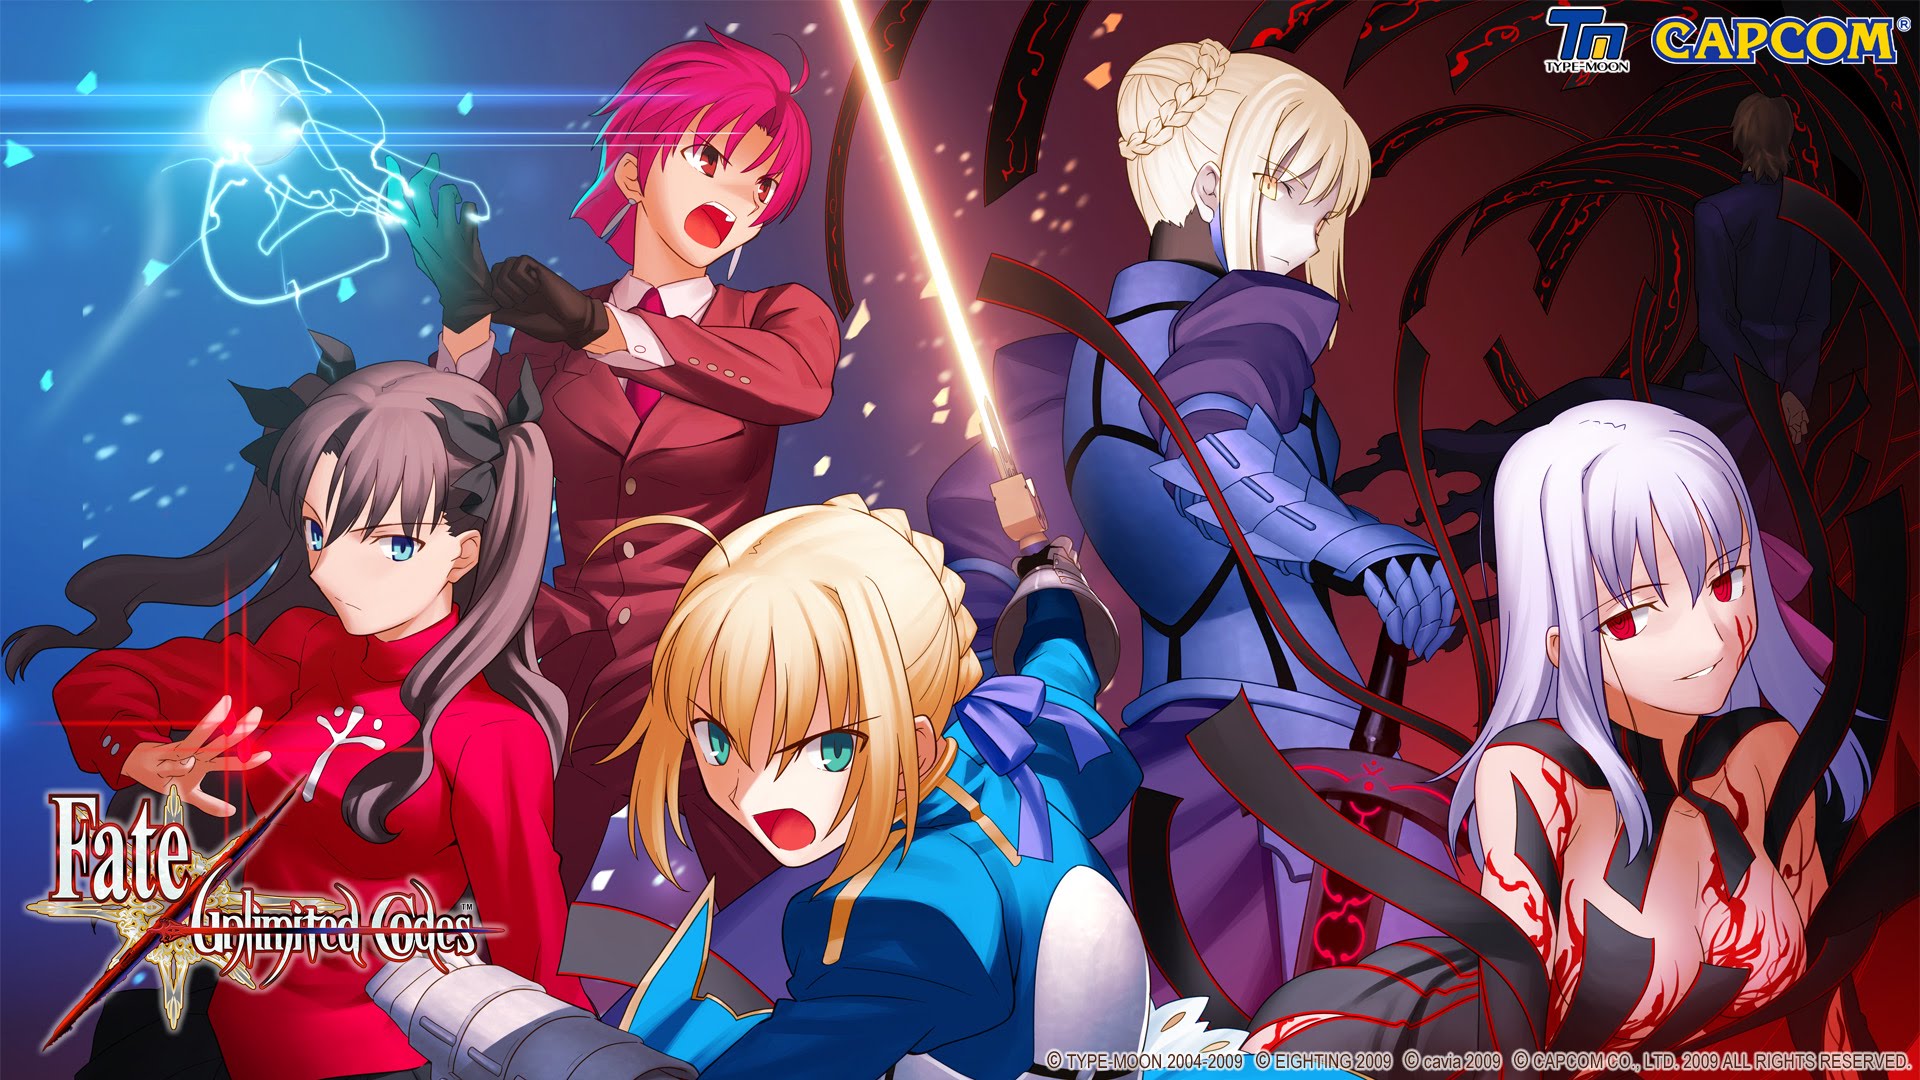 1920x1080 > Fate unlimited Codes Wallpapers